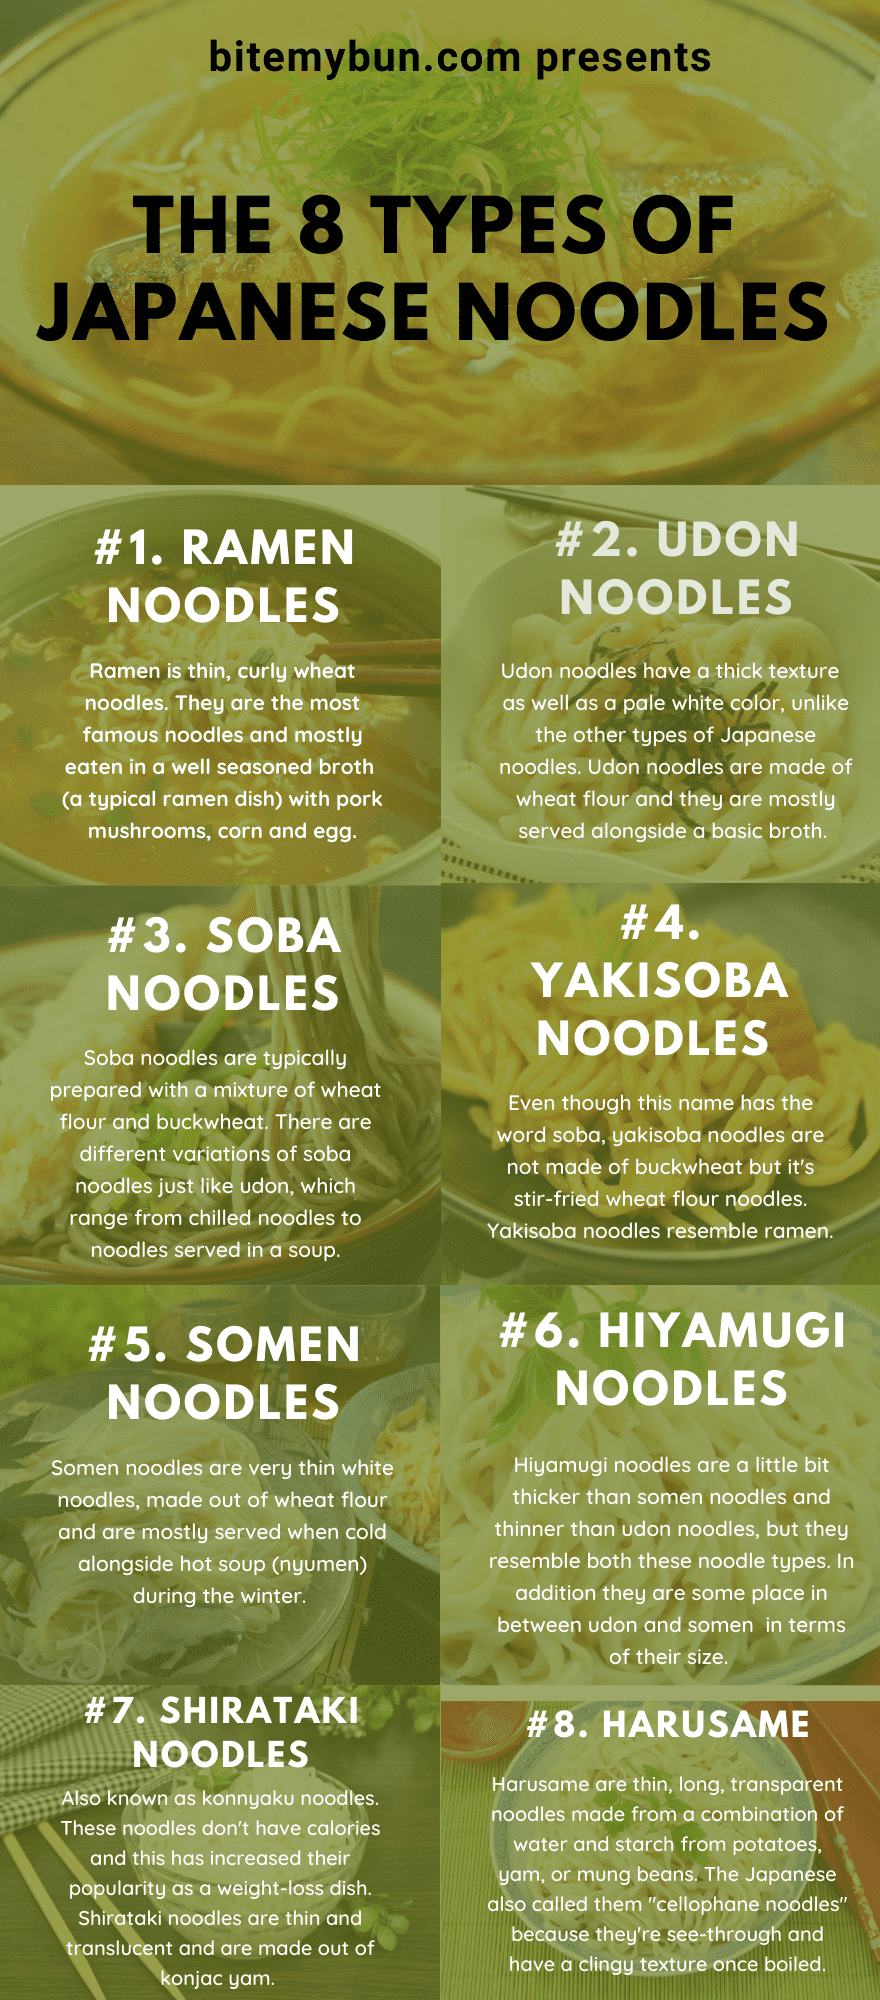 8 different types of Japanese noodles